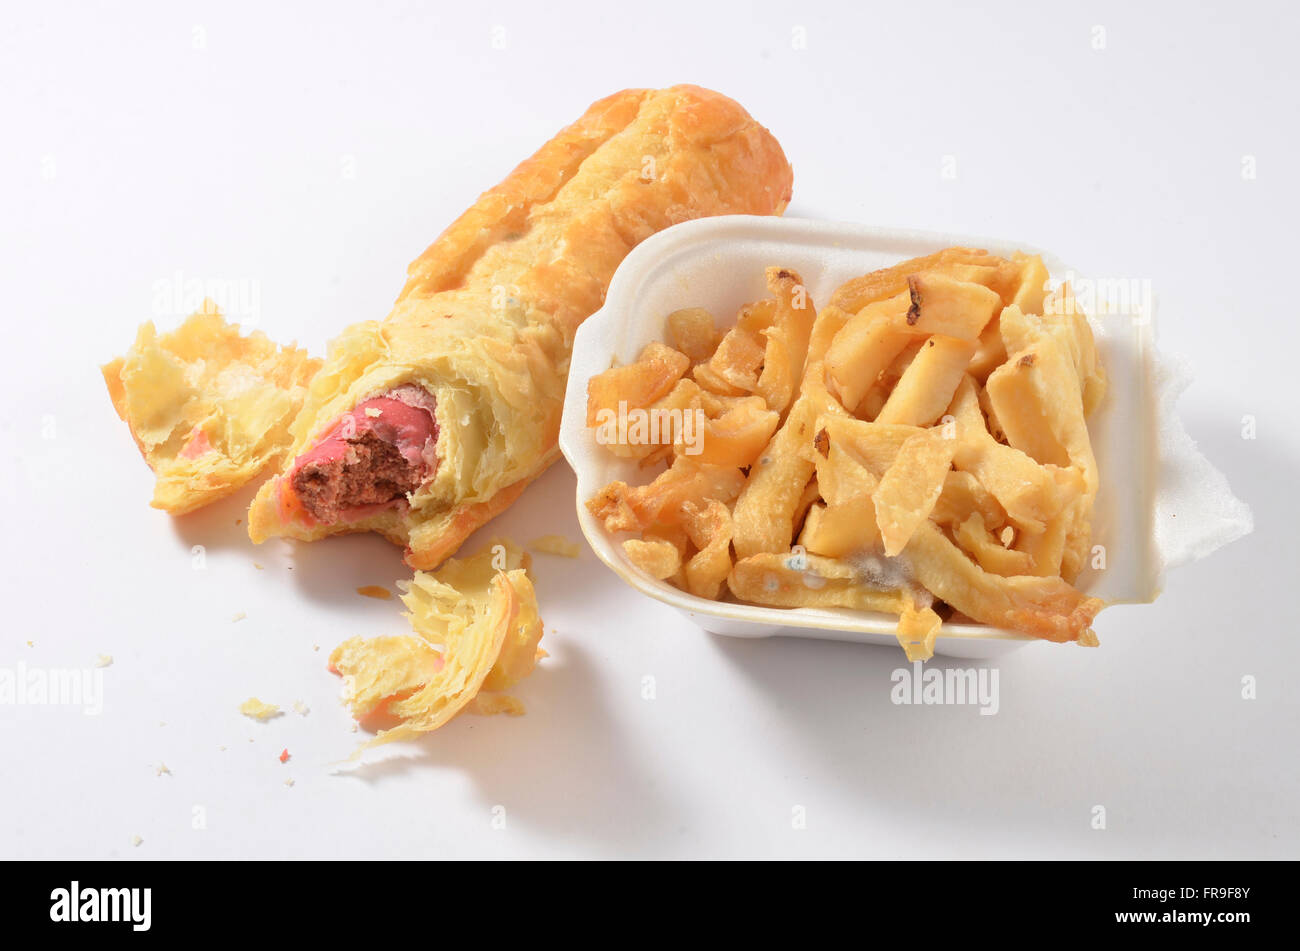 Rotten old potato chips and a sausage roll with bacteria and mold showing on it. Stock Photo